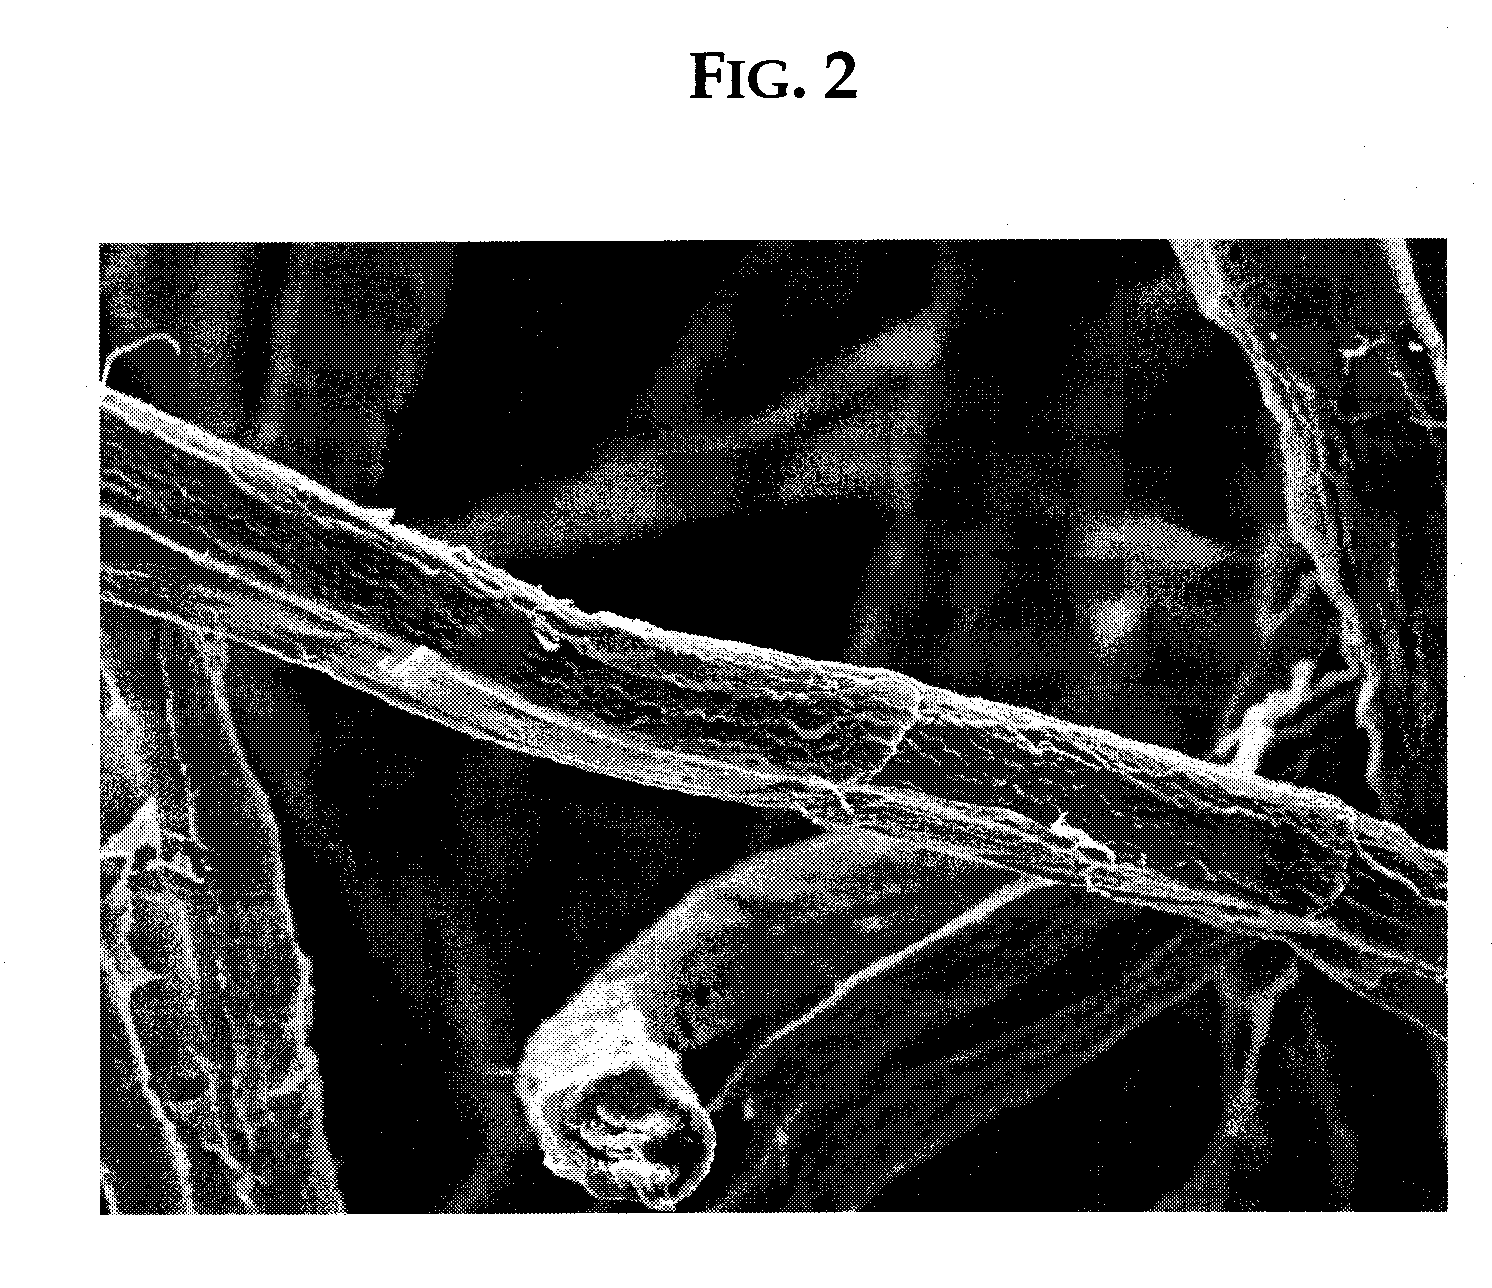 Chemically Stiffened Fibers In Sheet Form